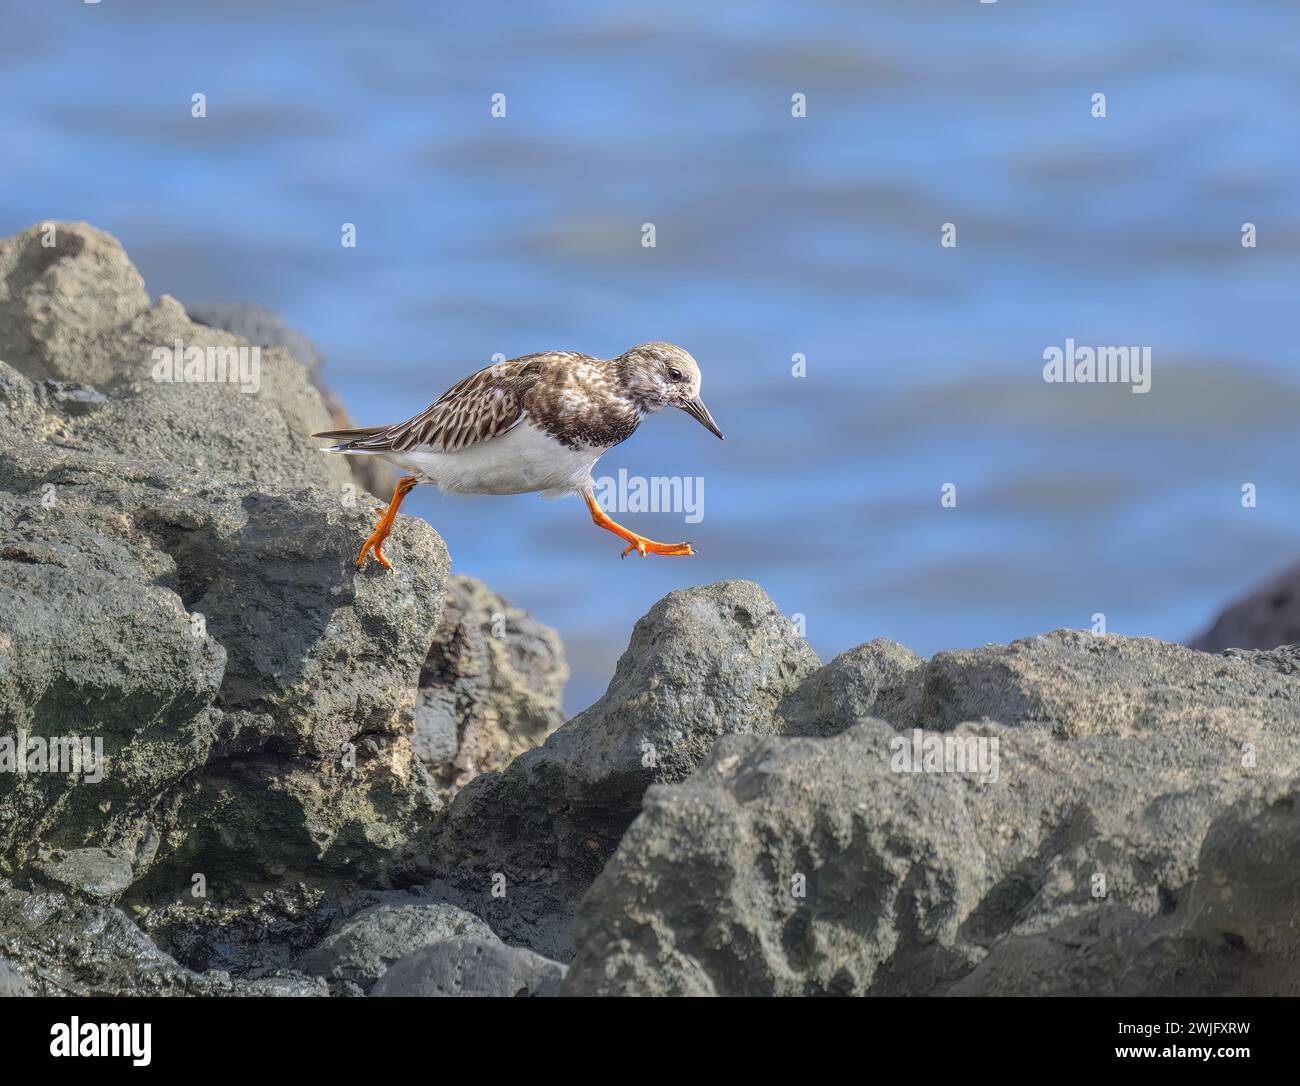 A ruddy turnstone, Arenaria interpres, in non-breeding plumage, striding a step forward one foot in the air on a stony shore, Fuerteventura, Canaries Stock Photo